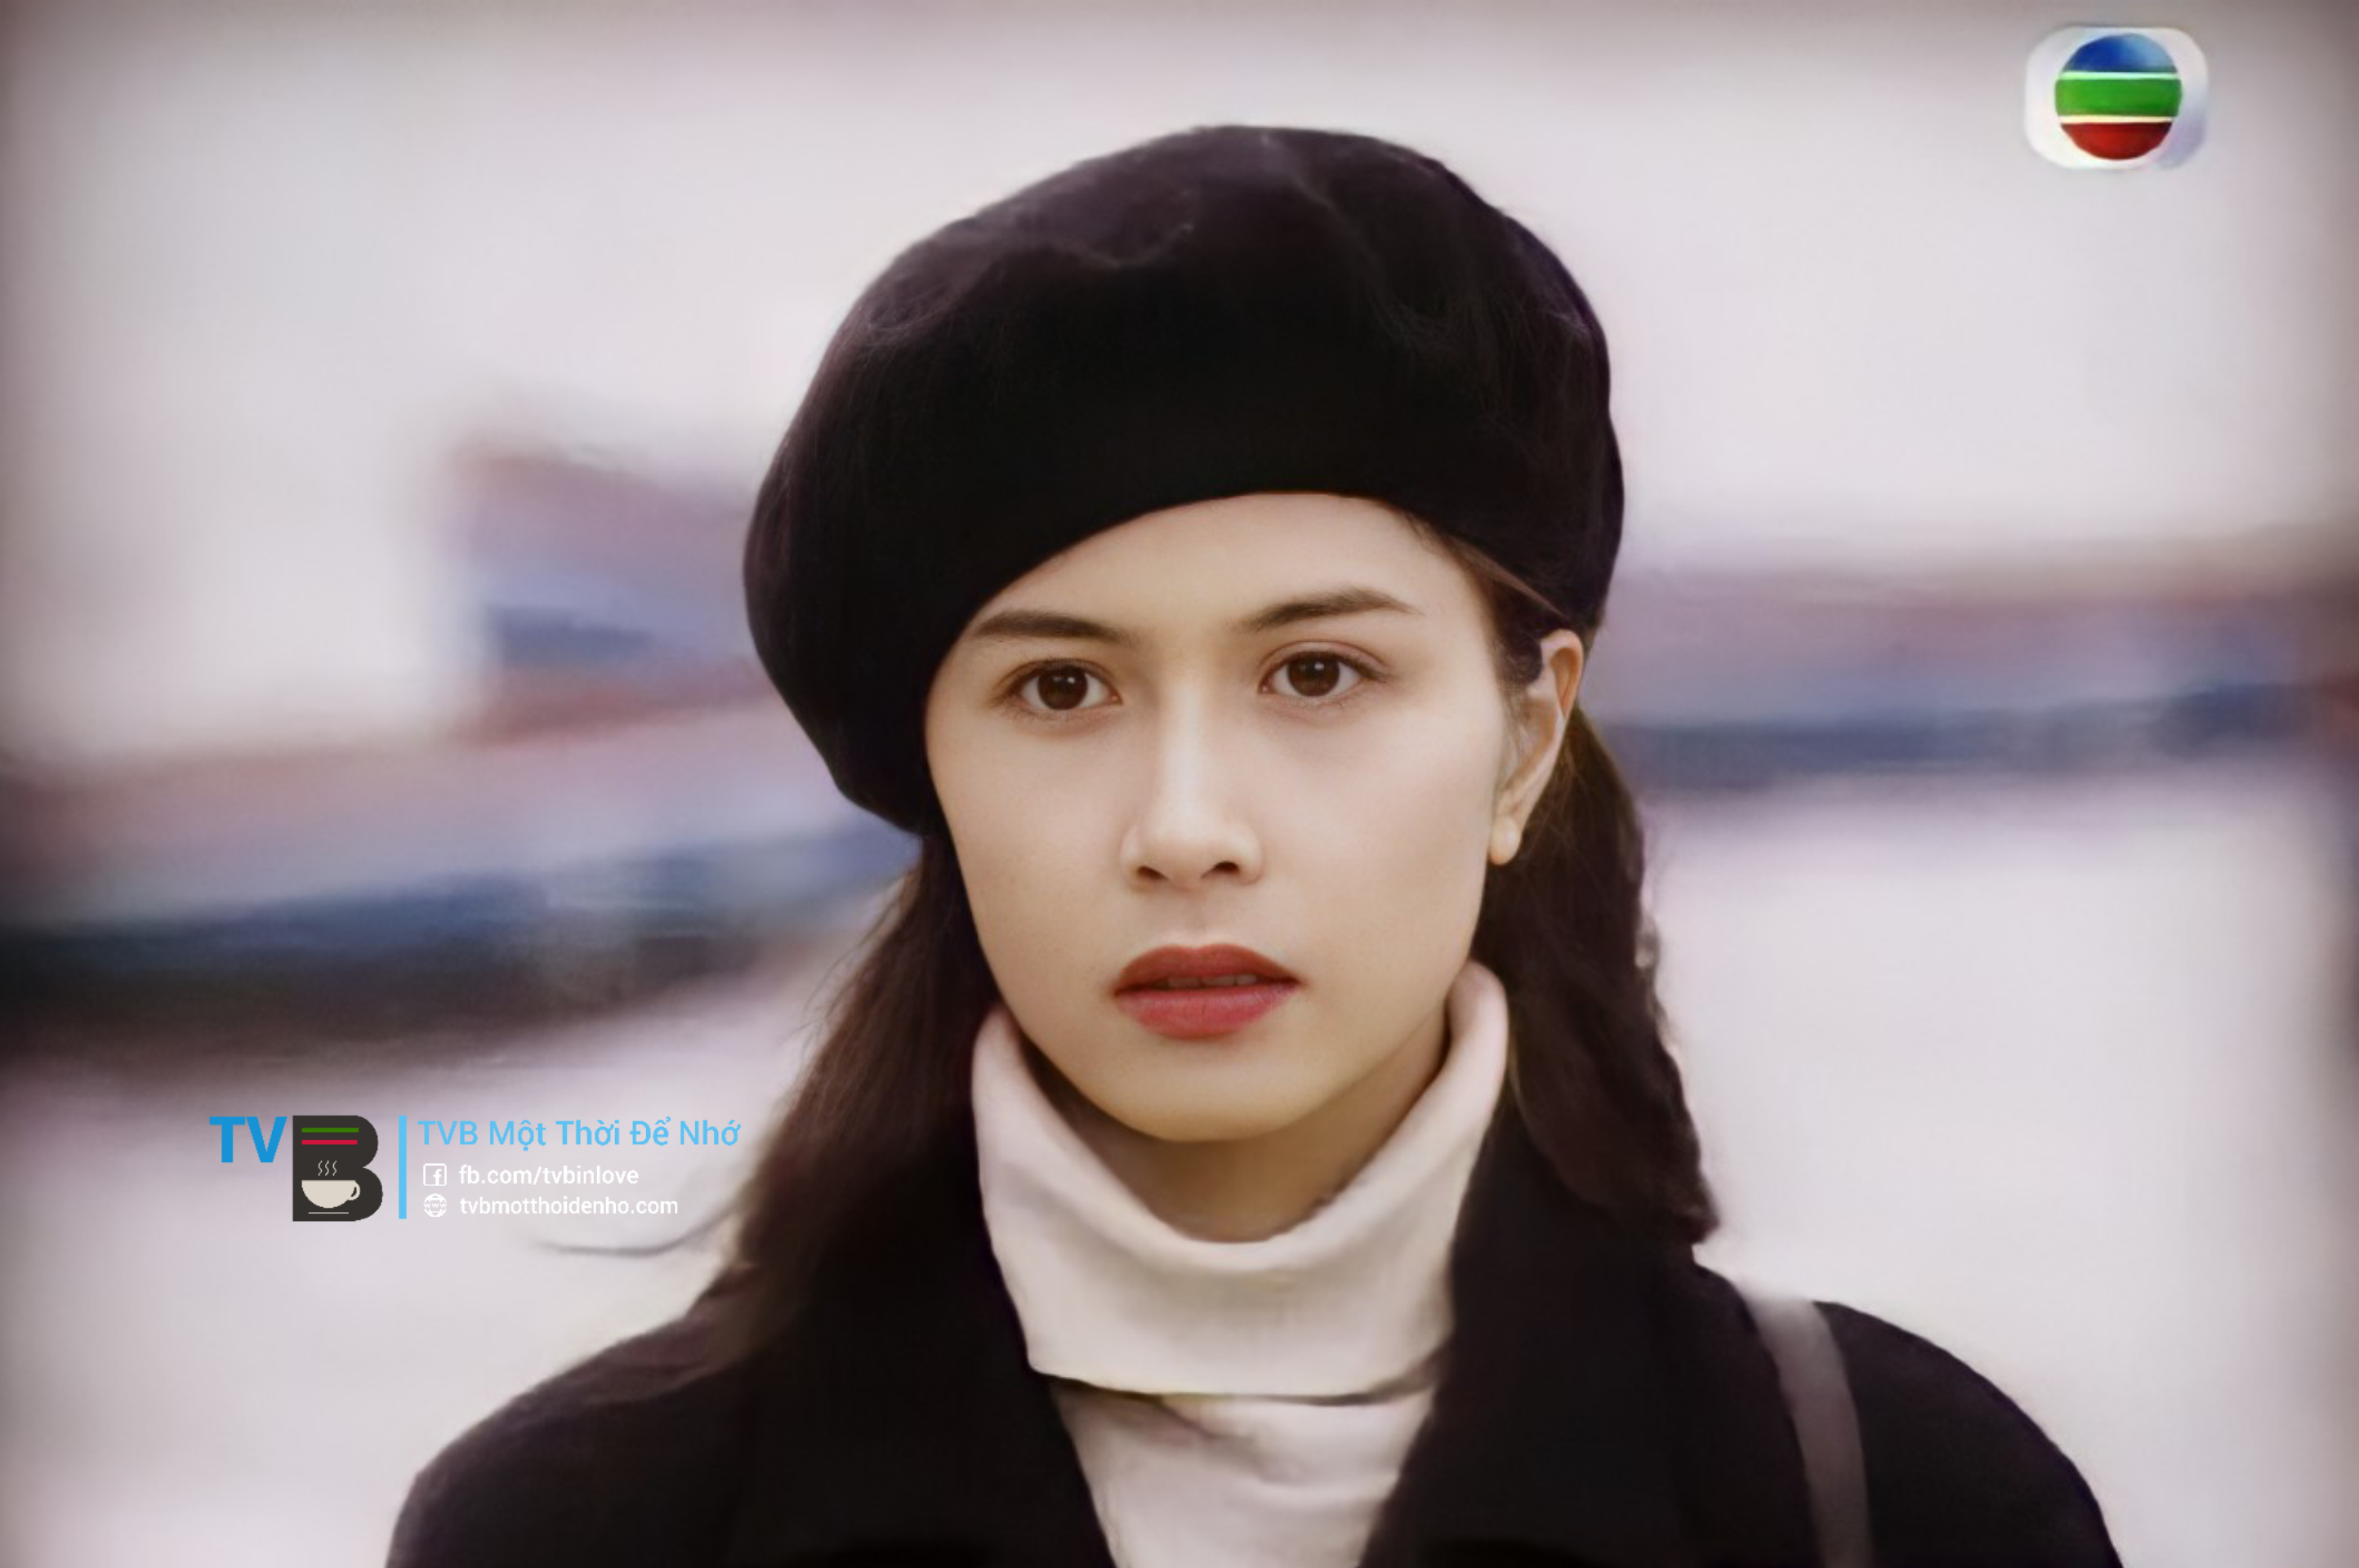 Especially the role of "Vi Hai Di" in "The 3rd French Type" highlights Thieu My Ky's acting skills. In the movie, she appears with long hair, wearing a beret (Beret) full of girly. This look is truly unforgettable.